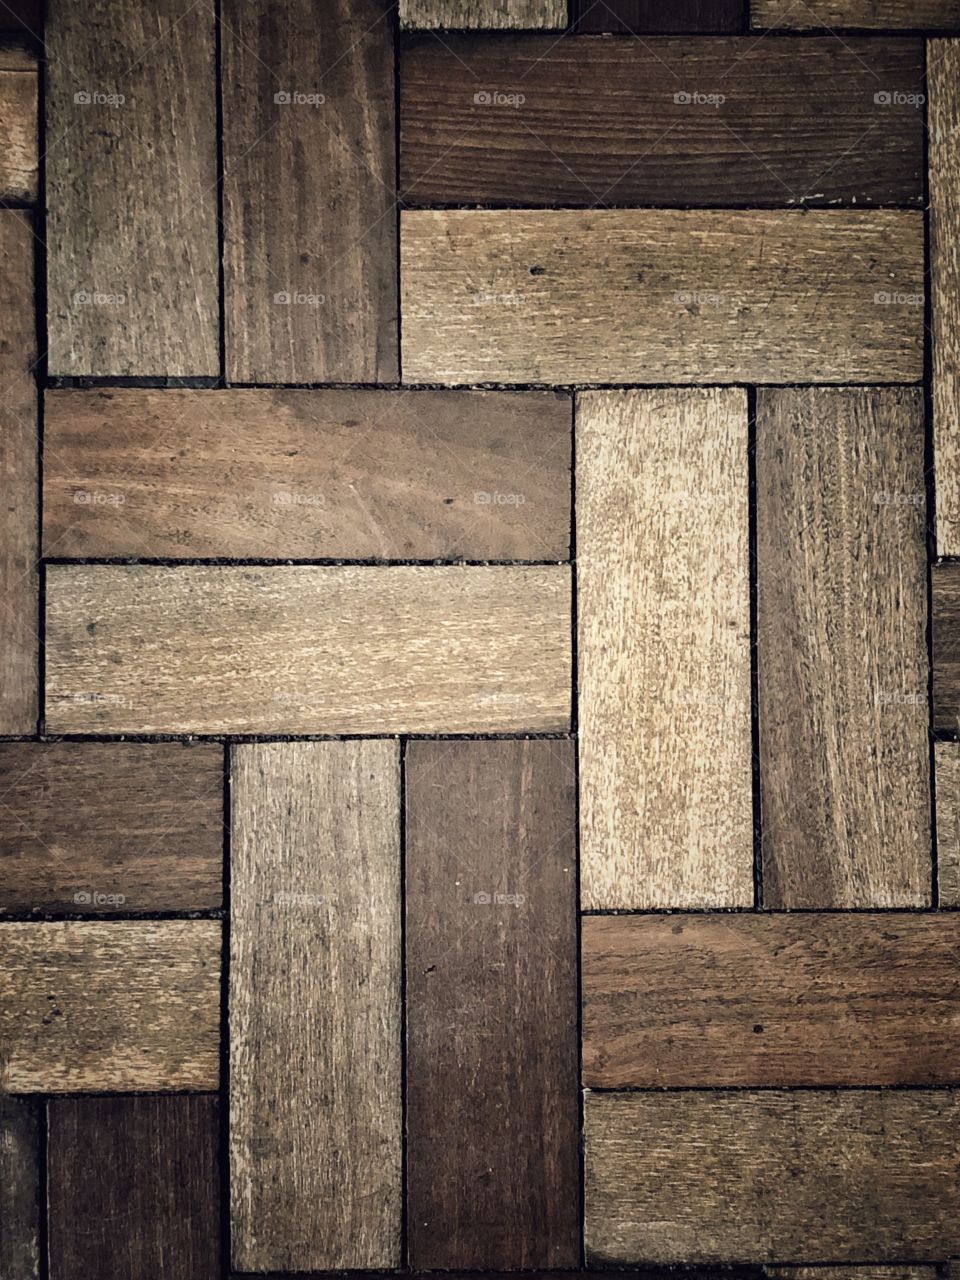 A beautiful pattern in the waiting room floor. Retangular pieces of wood creating a great pattern on the floor.